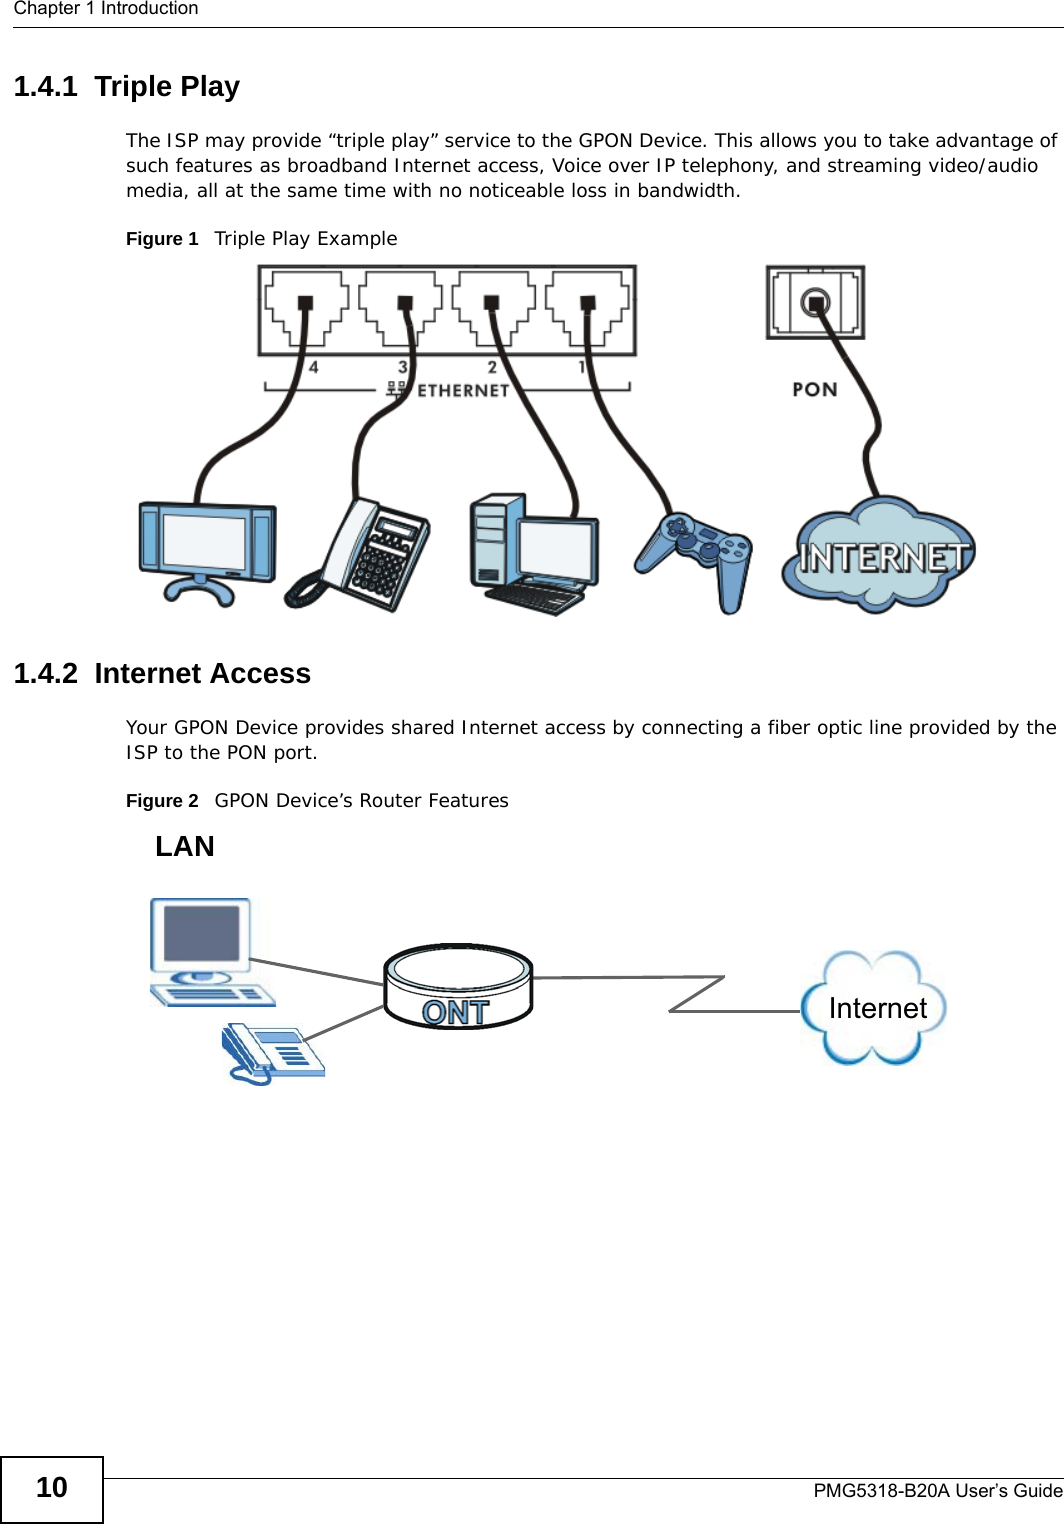 Chapter 1 IntroductionPMG5318-B20A User’s Guide101.4.1  Triple PlayThe ISP may provide “triple play” service to the GPON Device. This allows you to take advantage of such features as broadband Internet access, Voice over IP telephony, and streaming video/audio media, all at the same time with no noticeable loss in bandwidth.Figure 1   Triple Play Example1.4.2  Internet AccessYour GPON Device provides shared Internet access by connecting a fiber optic line provided by the ISP to the PON port.Figure 2   GPON Device’s Router FeaturesInternetLAN